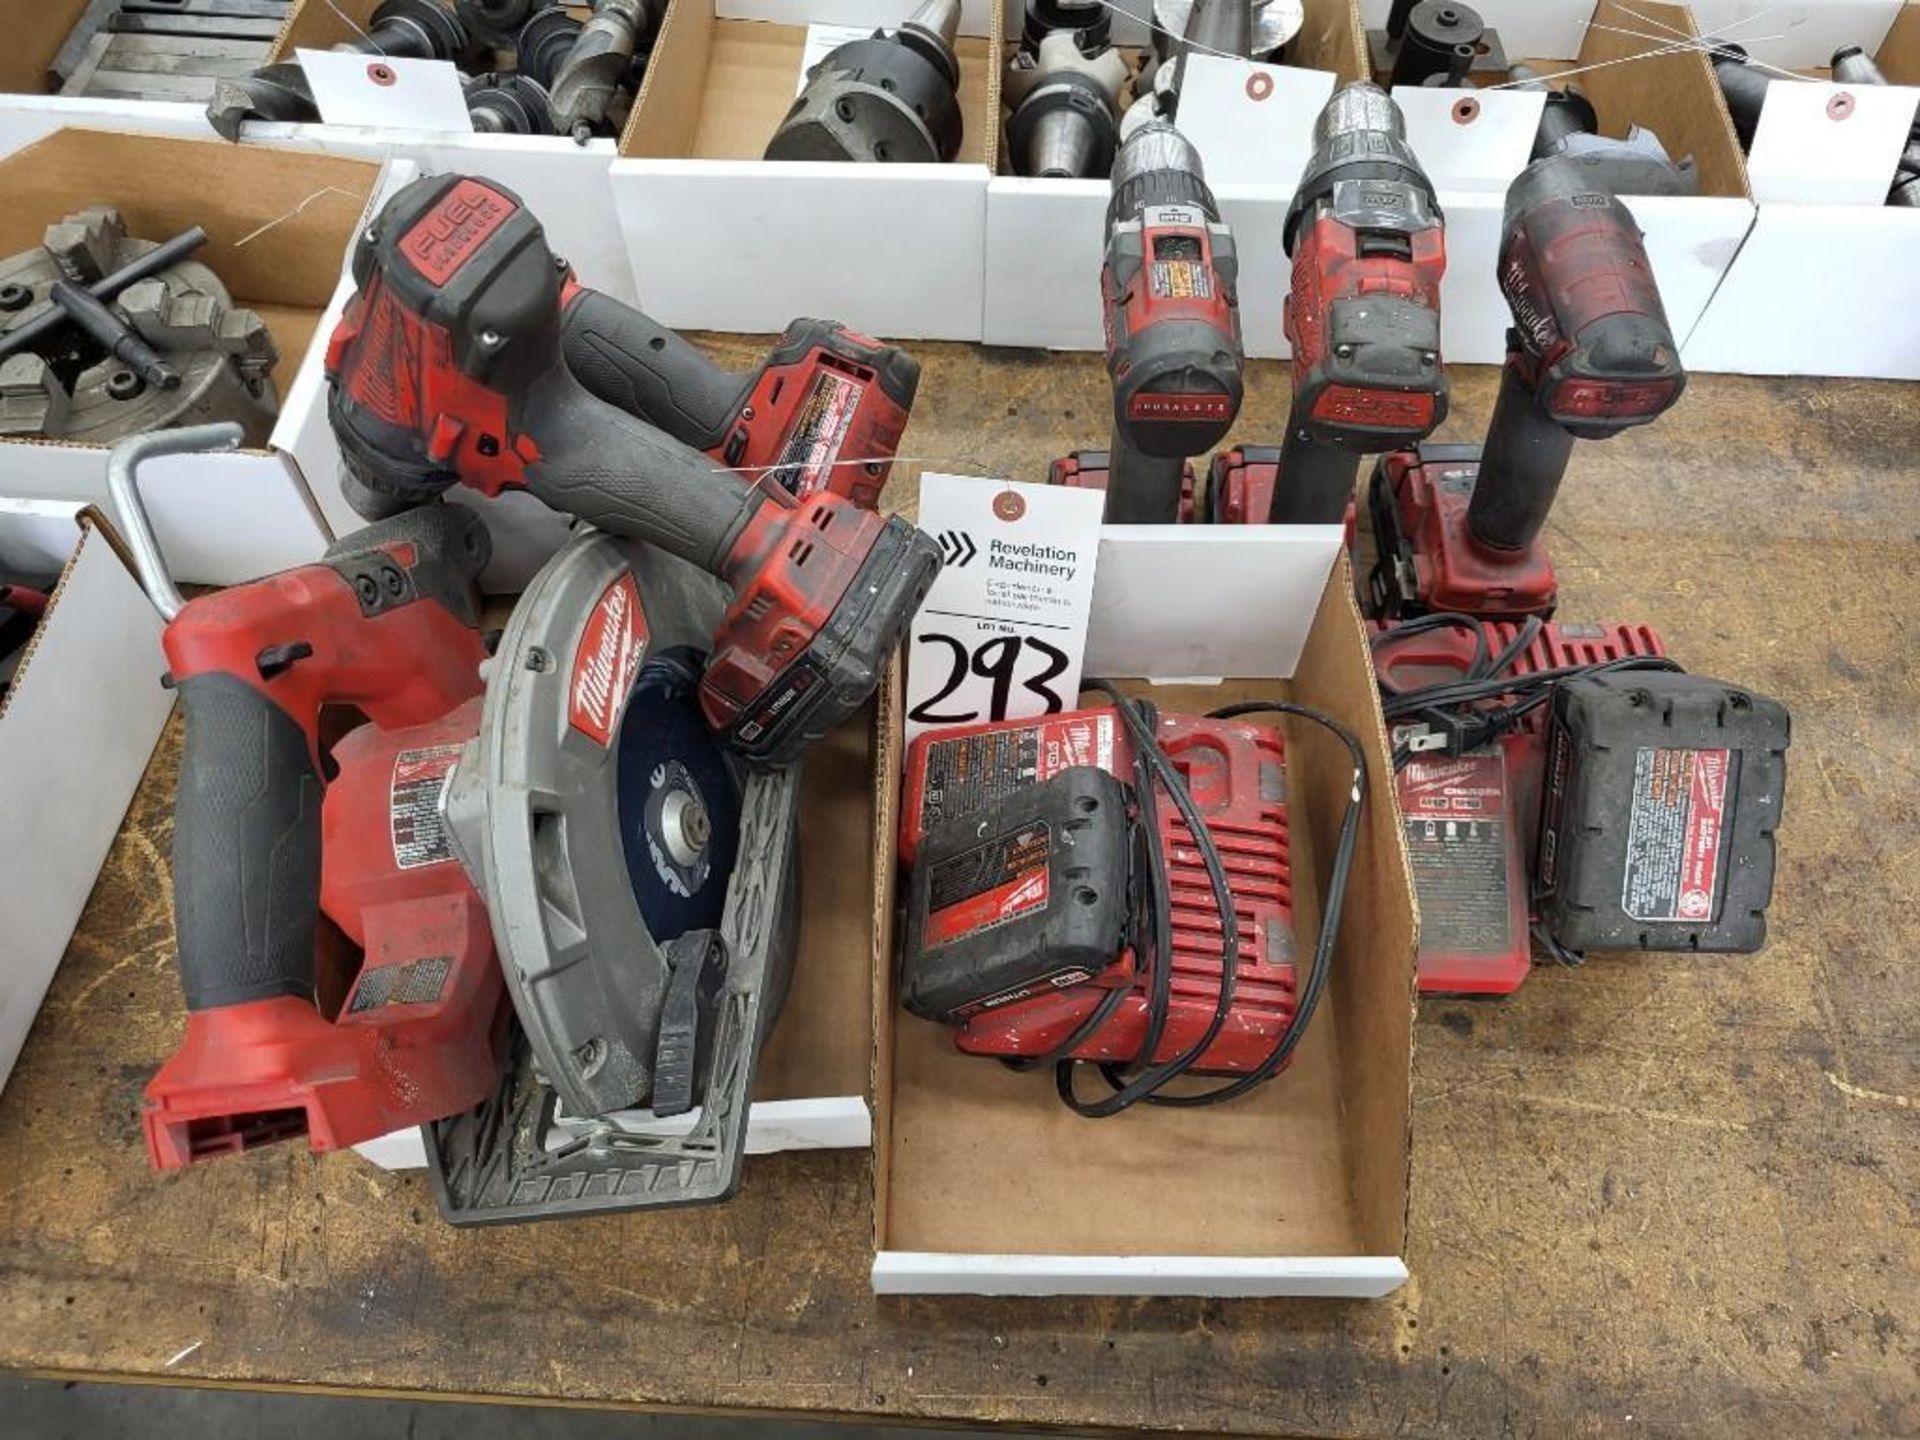 LOT OF MILWAUKEE CORDLIES DRILL DRIVERS, CIRCULAR SAW, CHARGERS, BATTERIES - Image 5 of 6